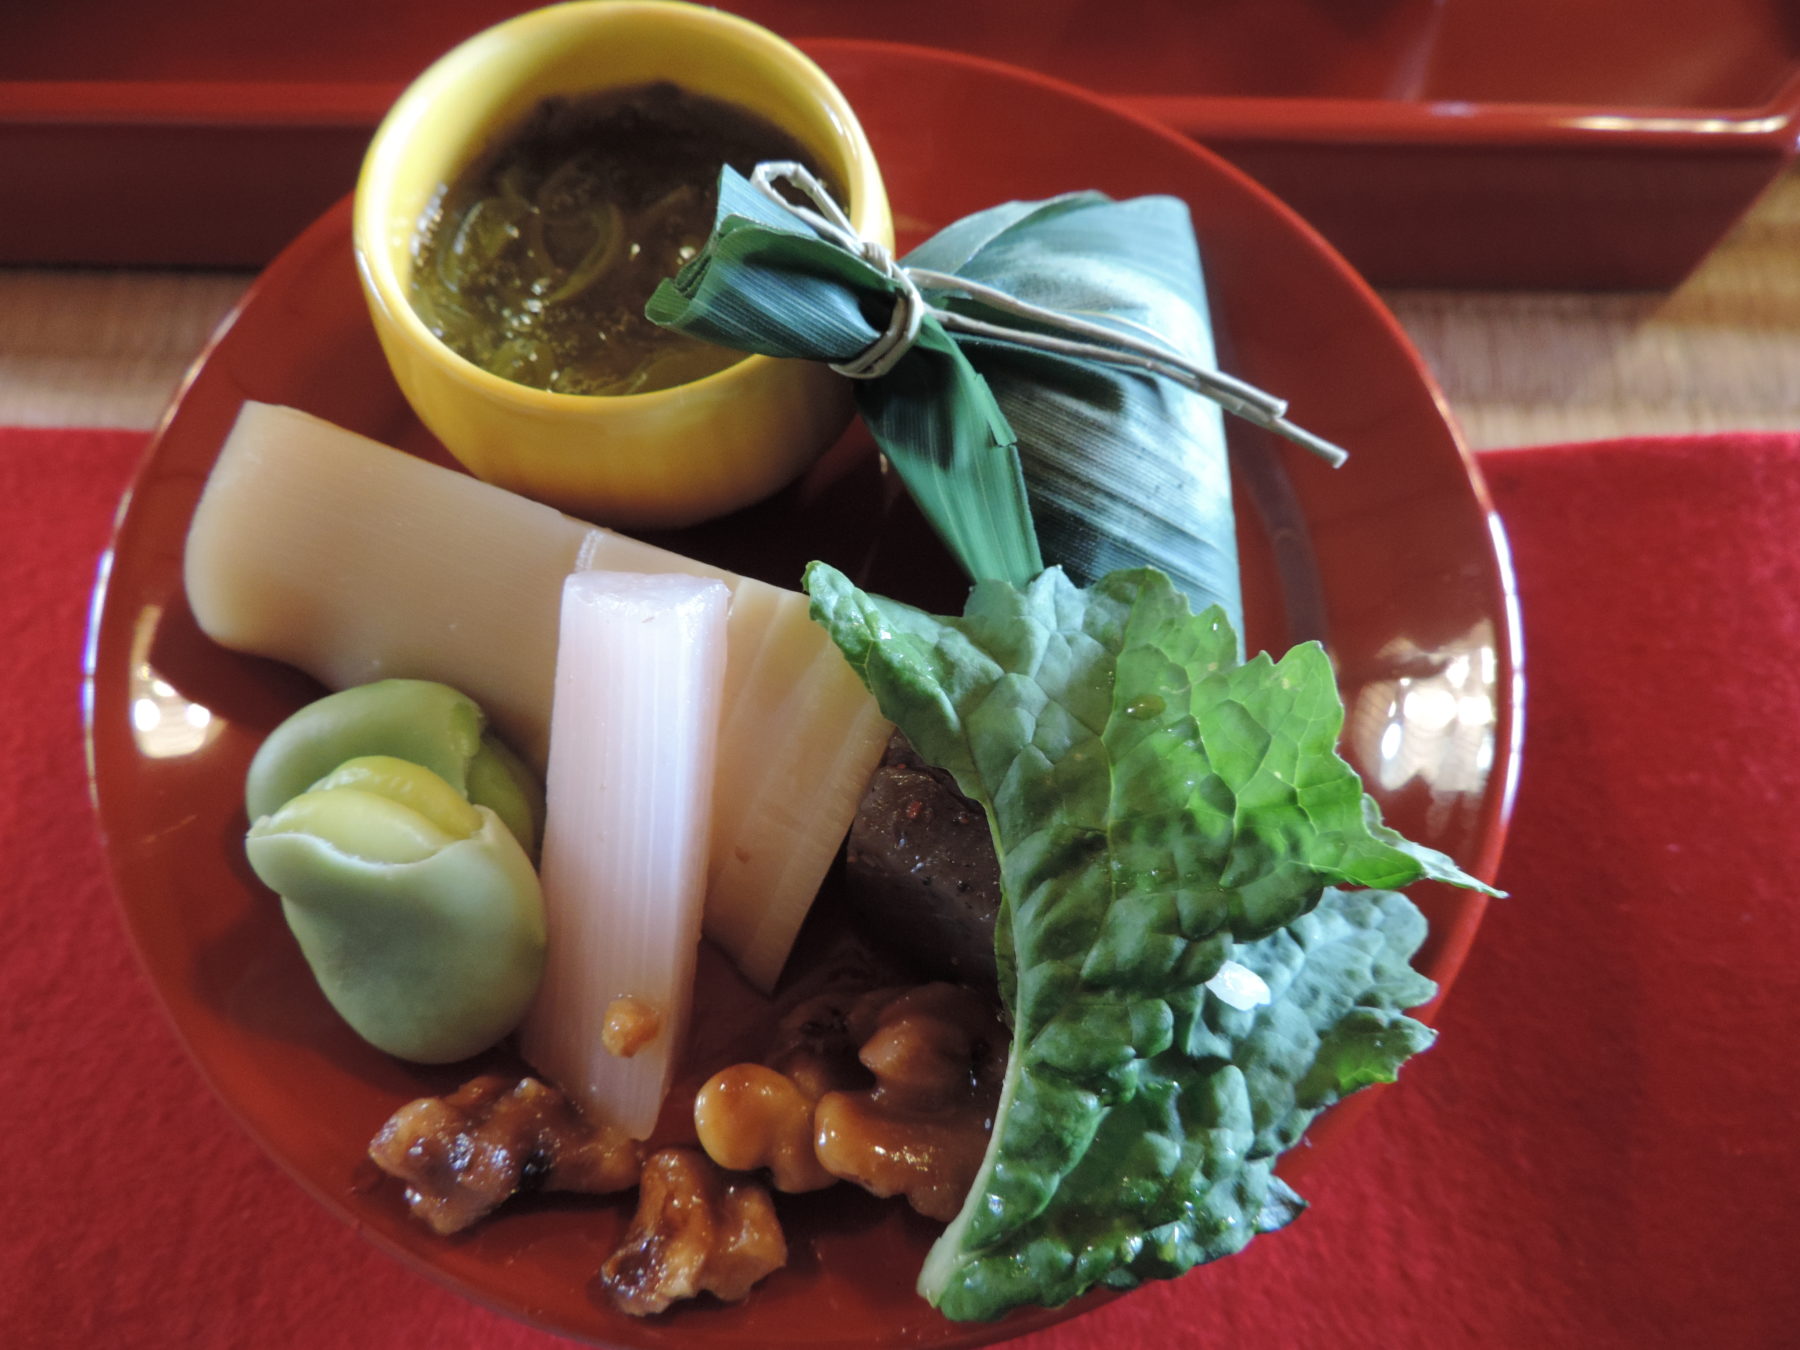 See how to present a soybean, and enjoy a Zen vegetarian lunch.